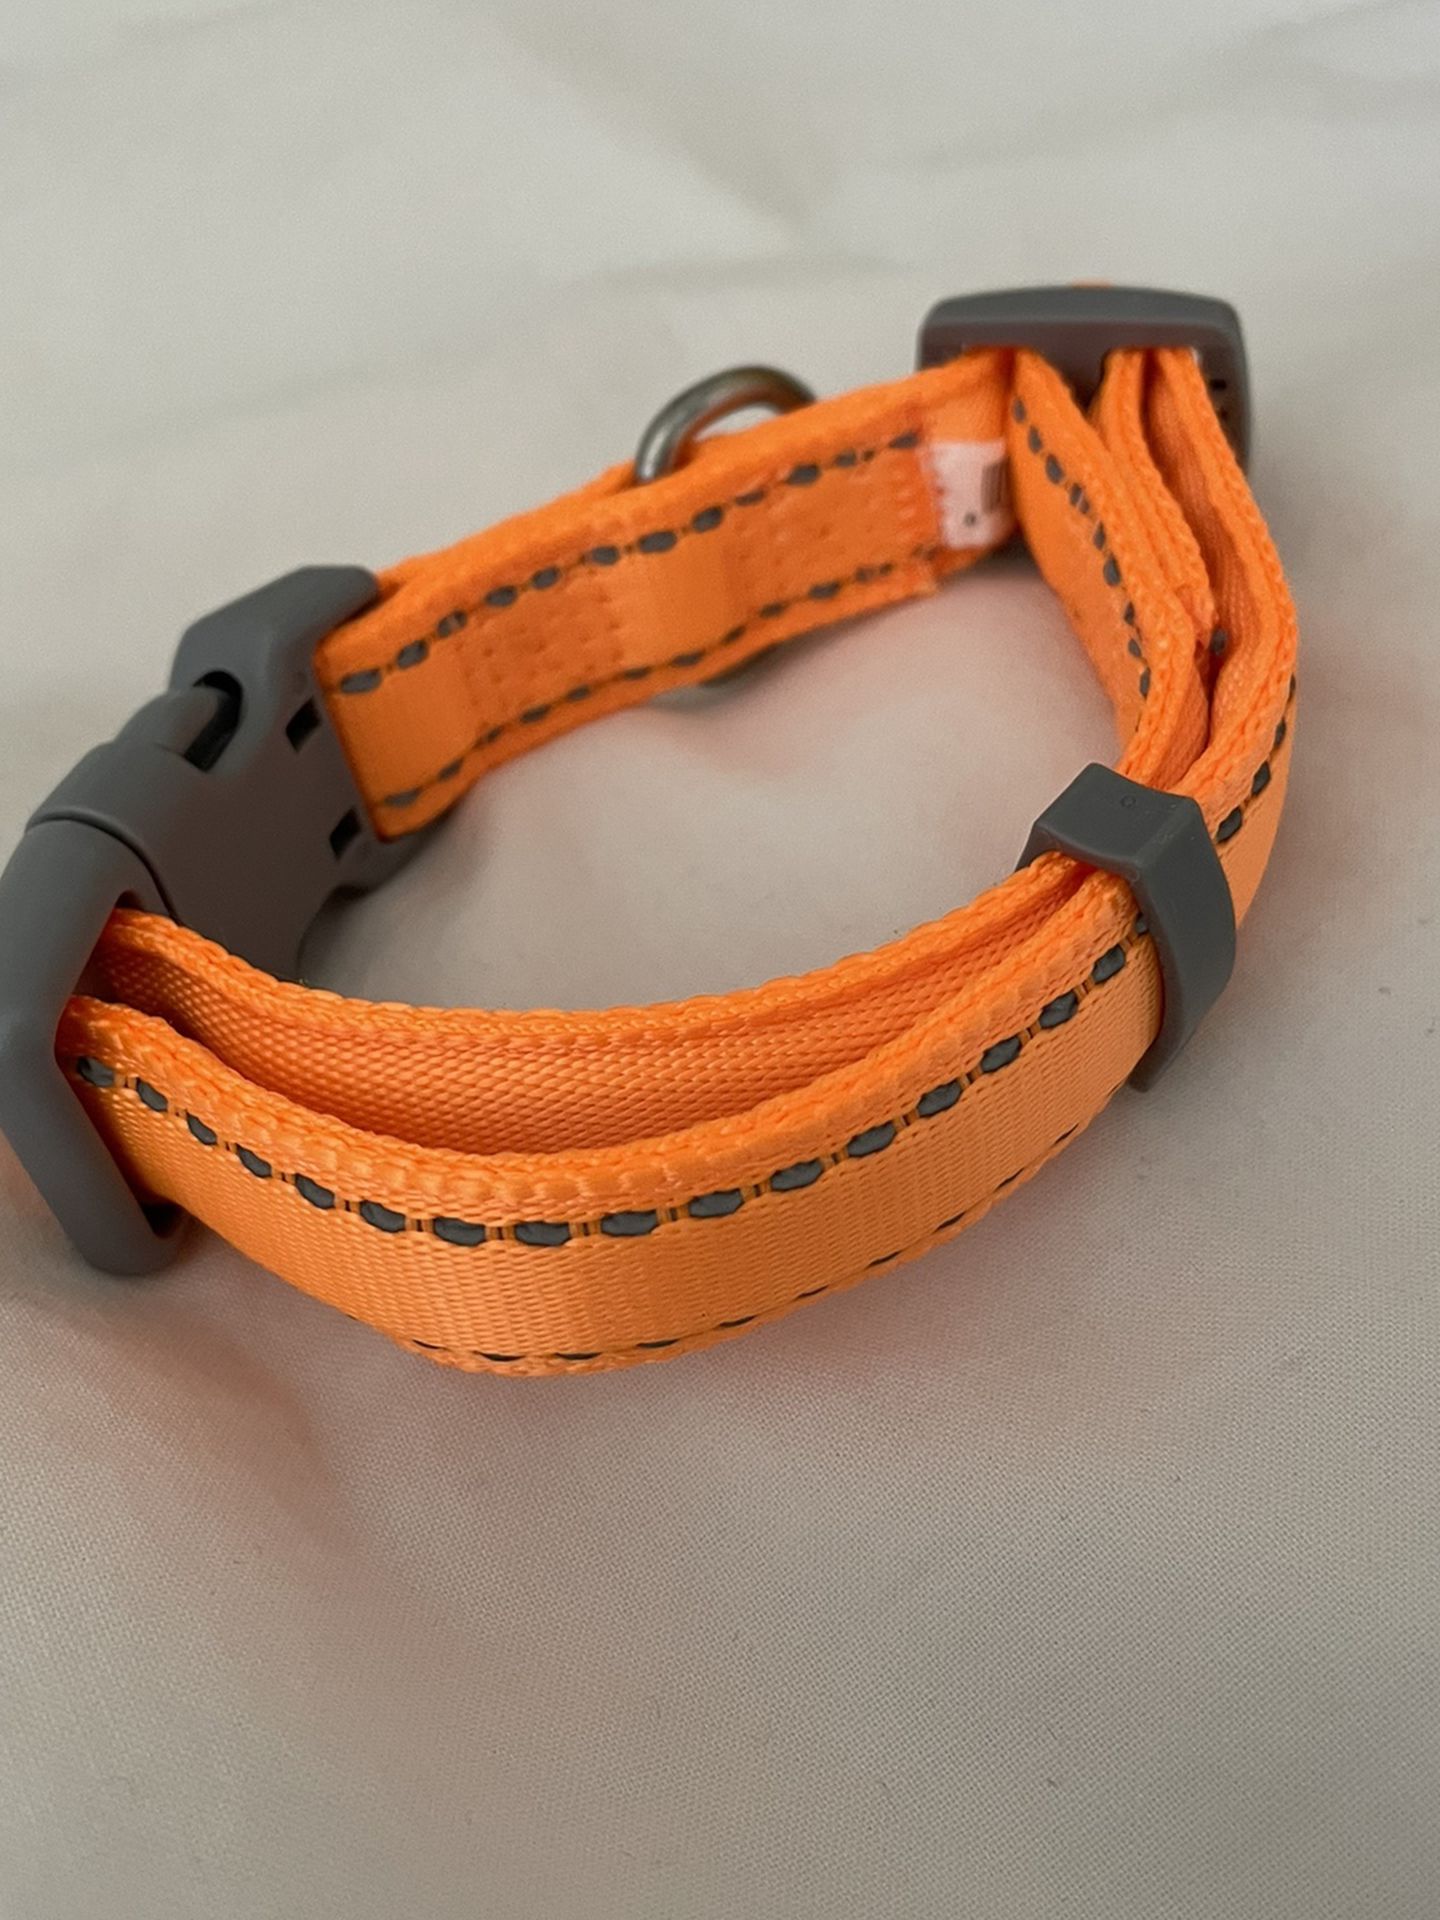 Orange Padded Reflective Dog Collar Small New Never Used Never Worn